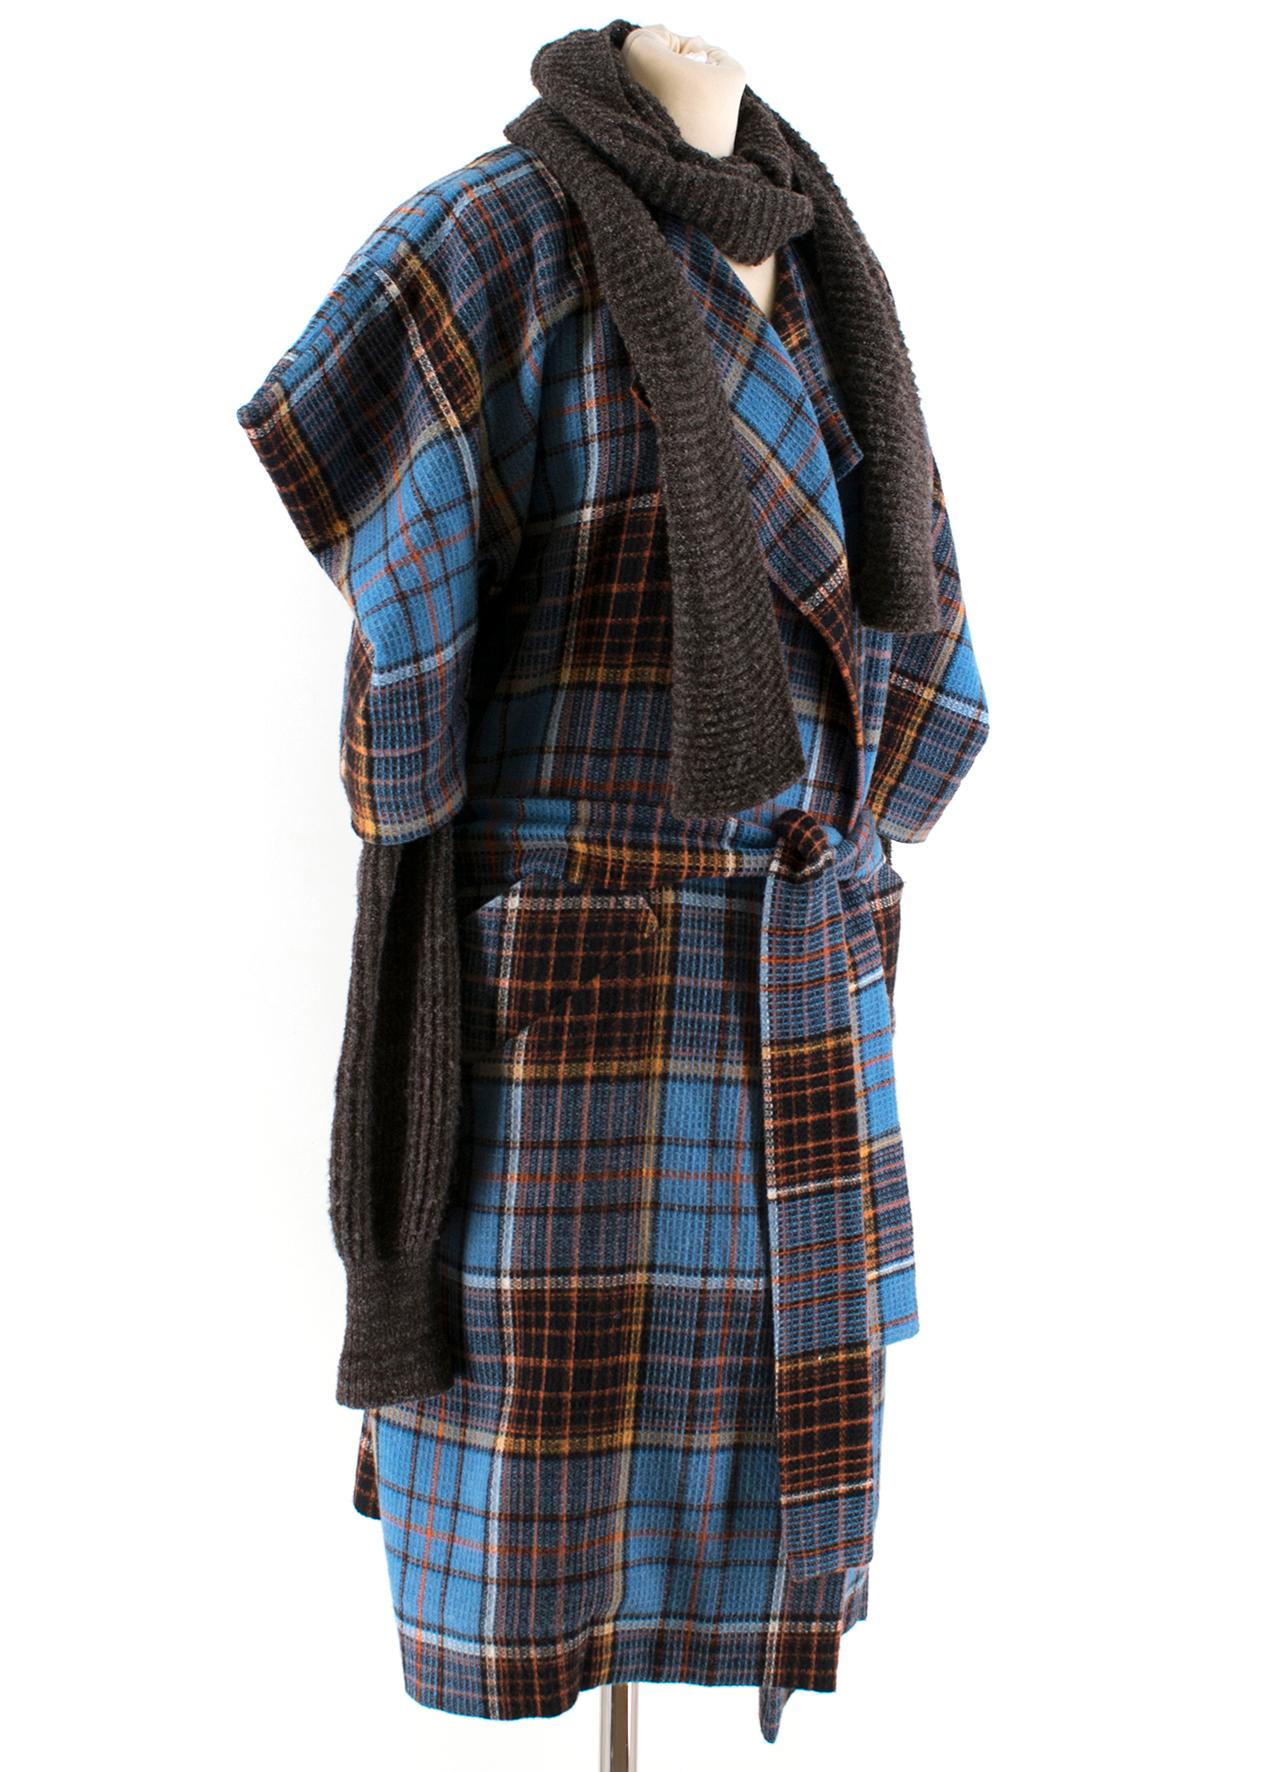 Vivienne Westwood Anglomania Dionysian tartan coat

- Blue, orange and black, recycled  wool-blend paid
- Attached ribbed-knit scarf-effect collar
- Short structured sleeves, long ribbed-knit sleeve under lay
- Welt pockets 
- Open front, matching